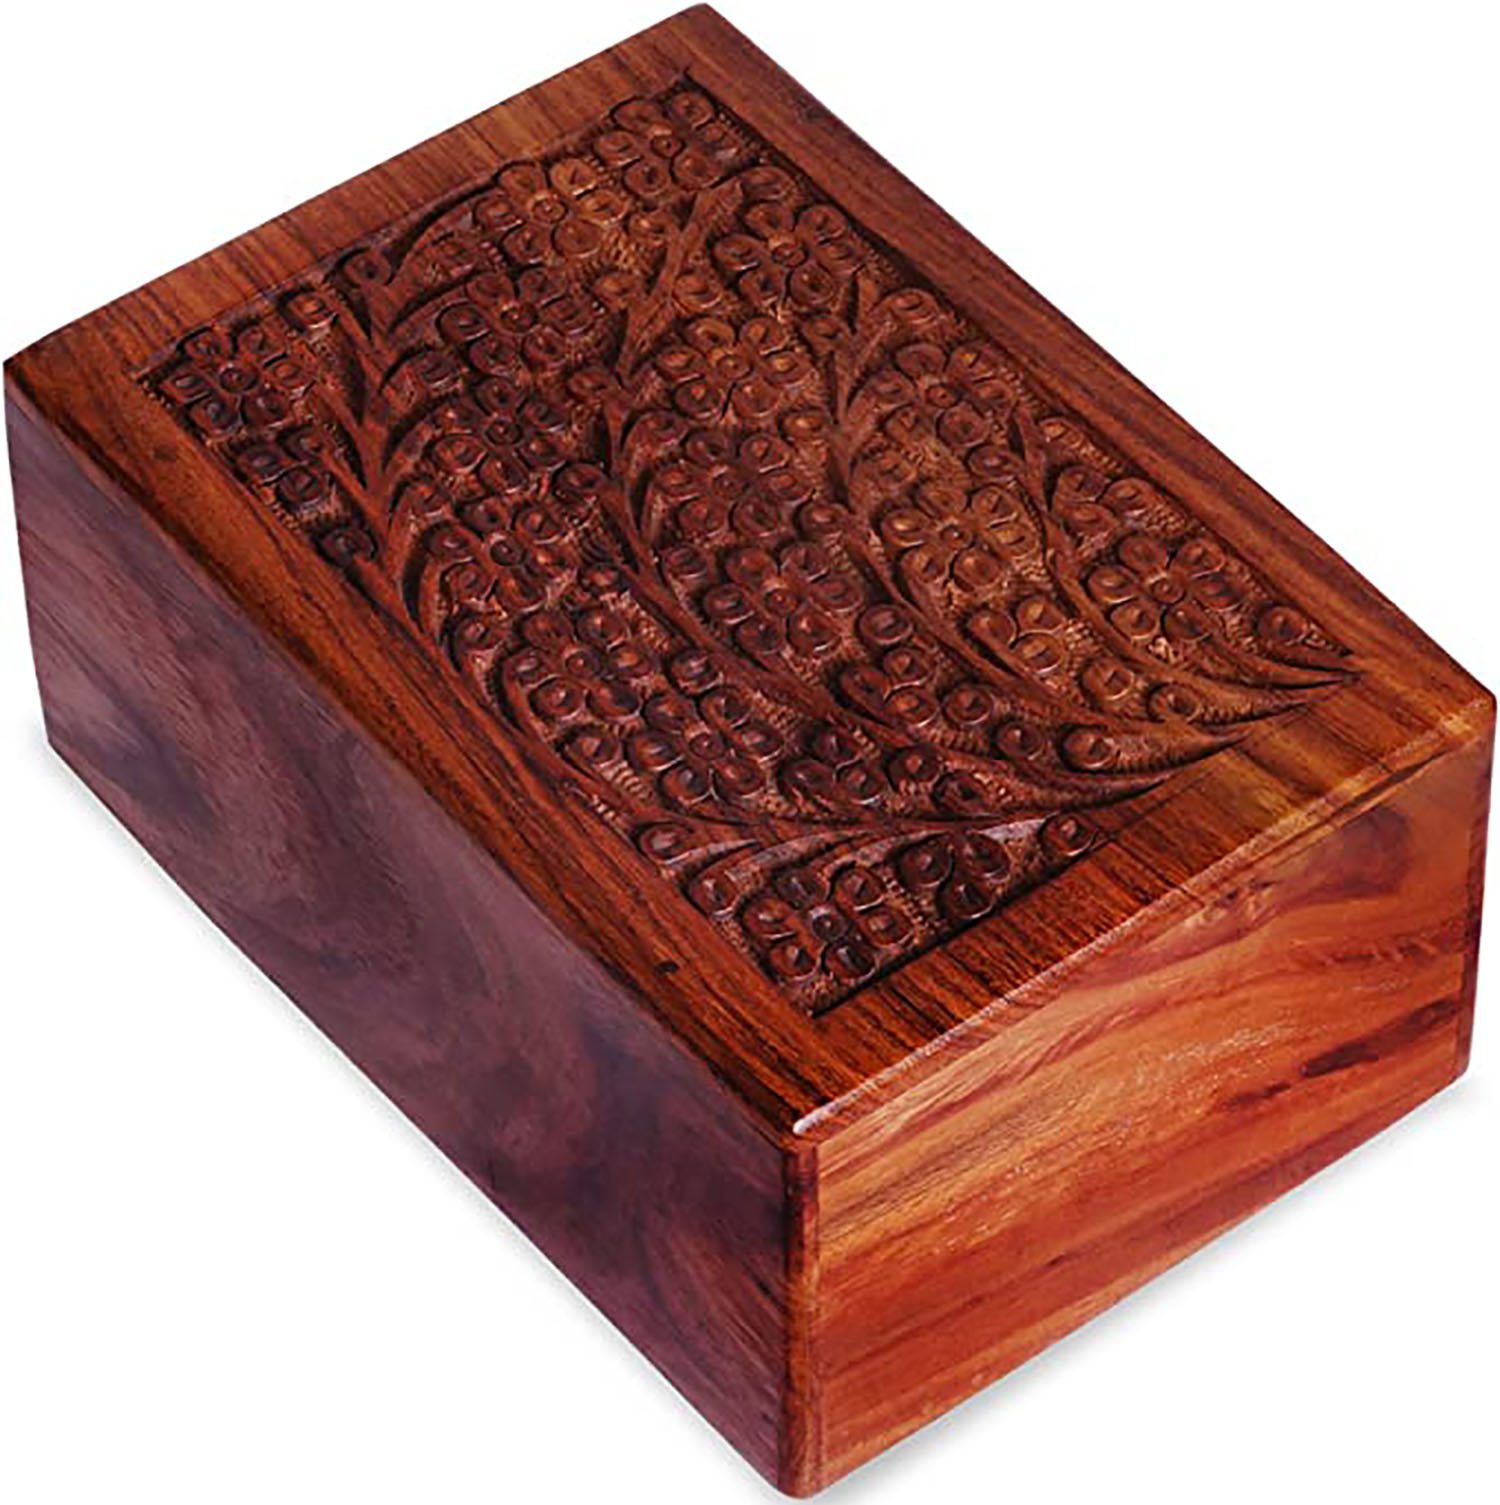 Hand carved Urn Wooden Box | Premium Wooden Box for Human ashes | Wood Urn Box manufacturer & supplier